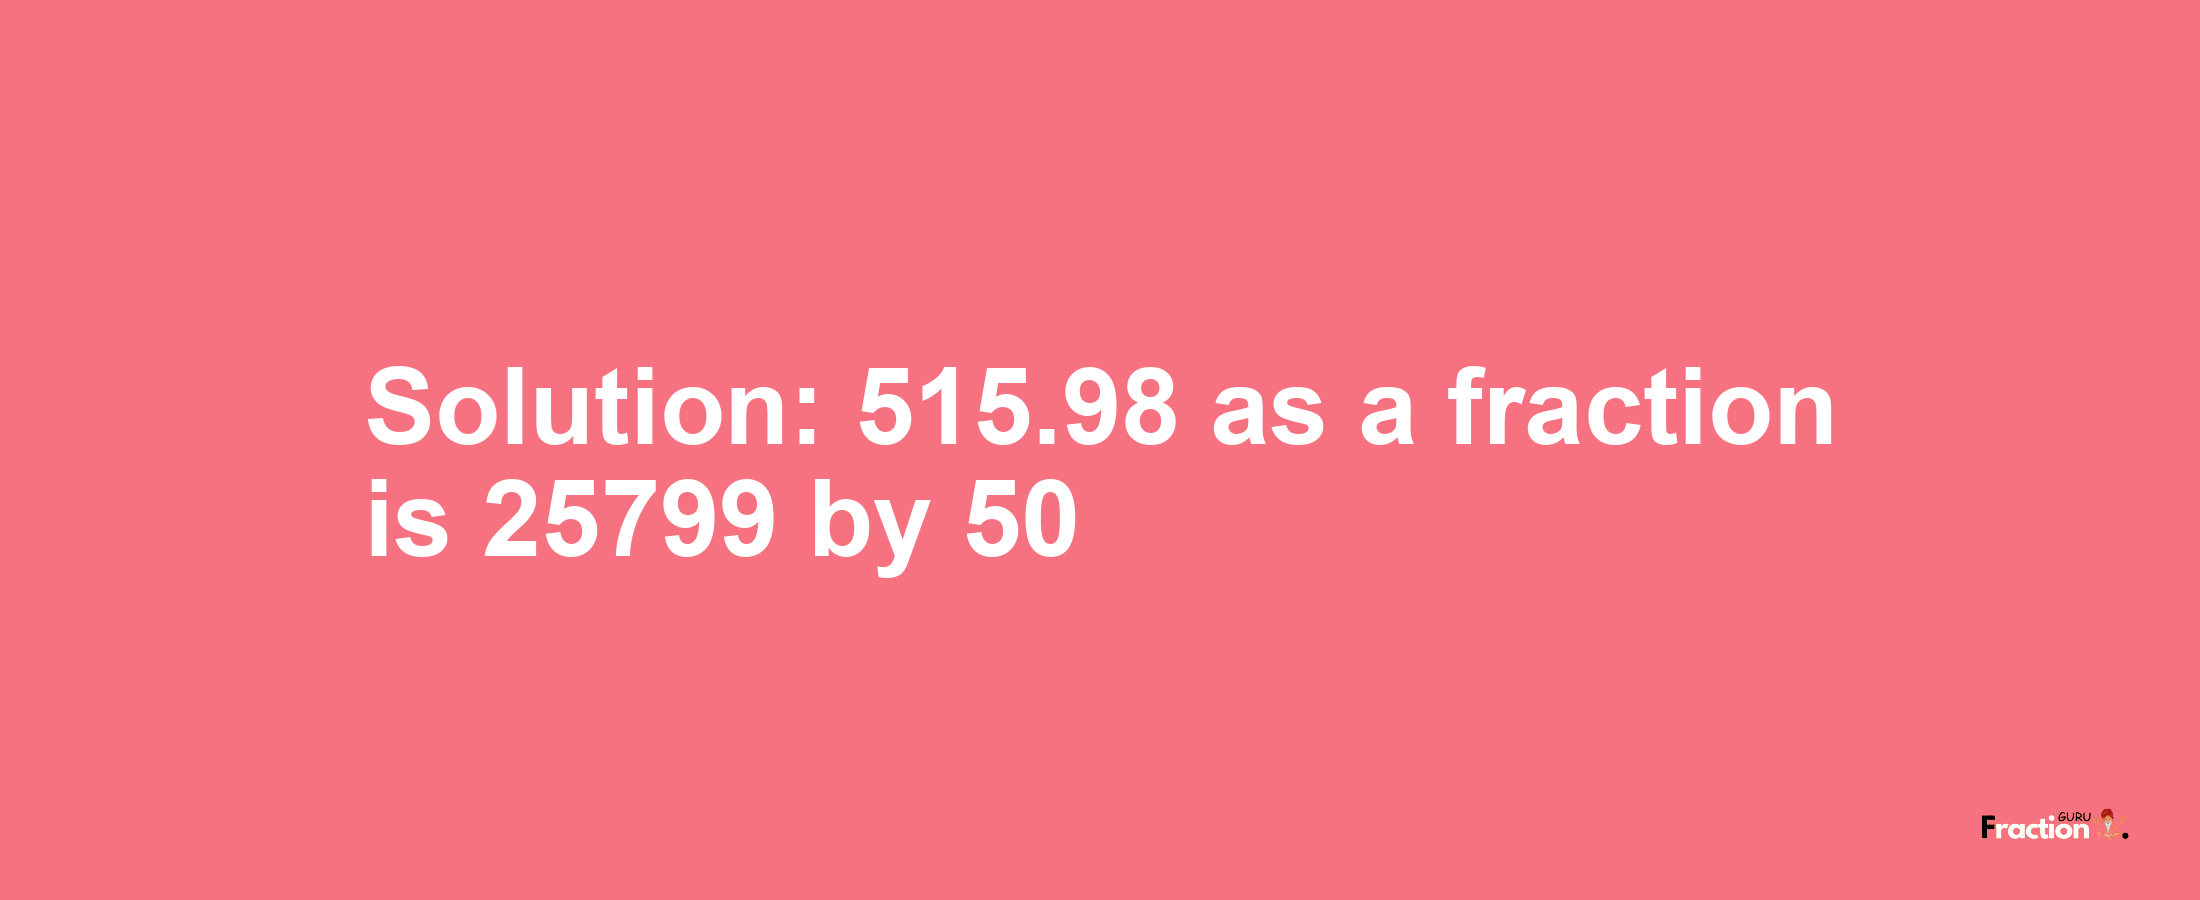 Solution:515.98 as a fraction is 25799/50